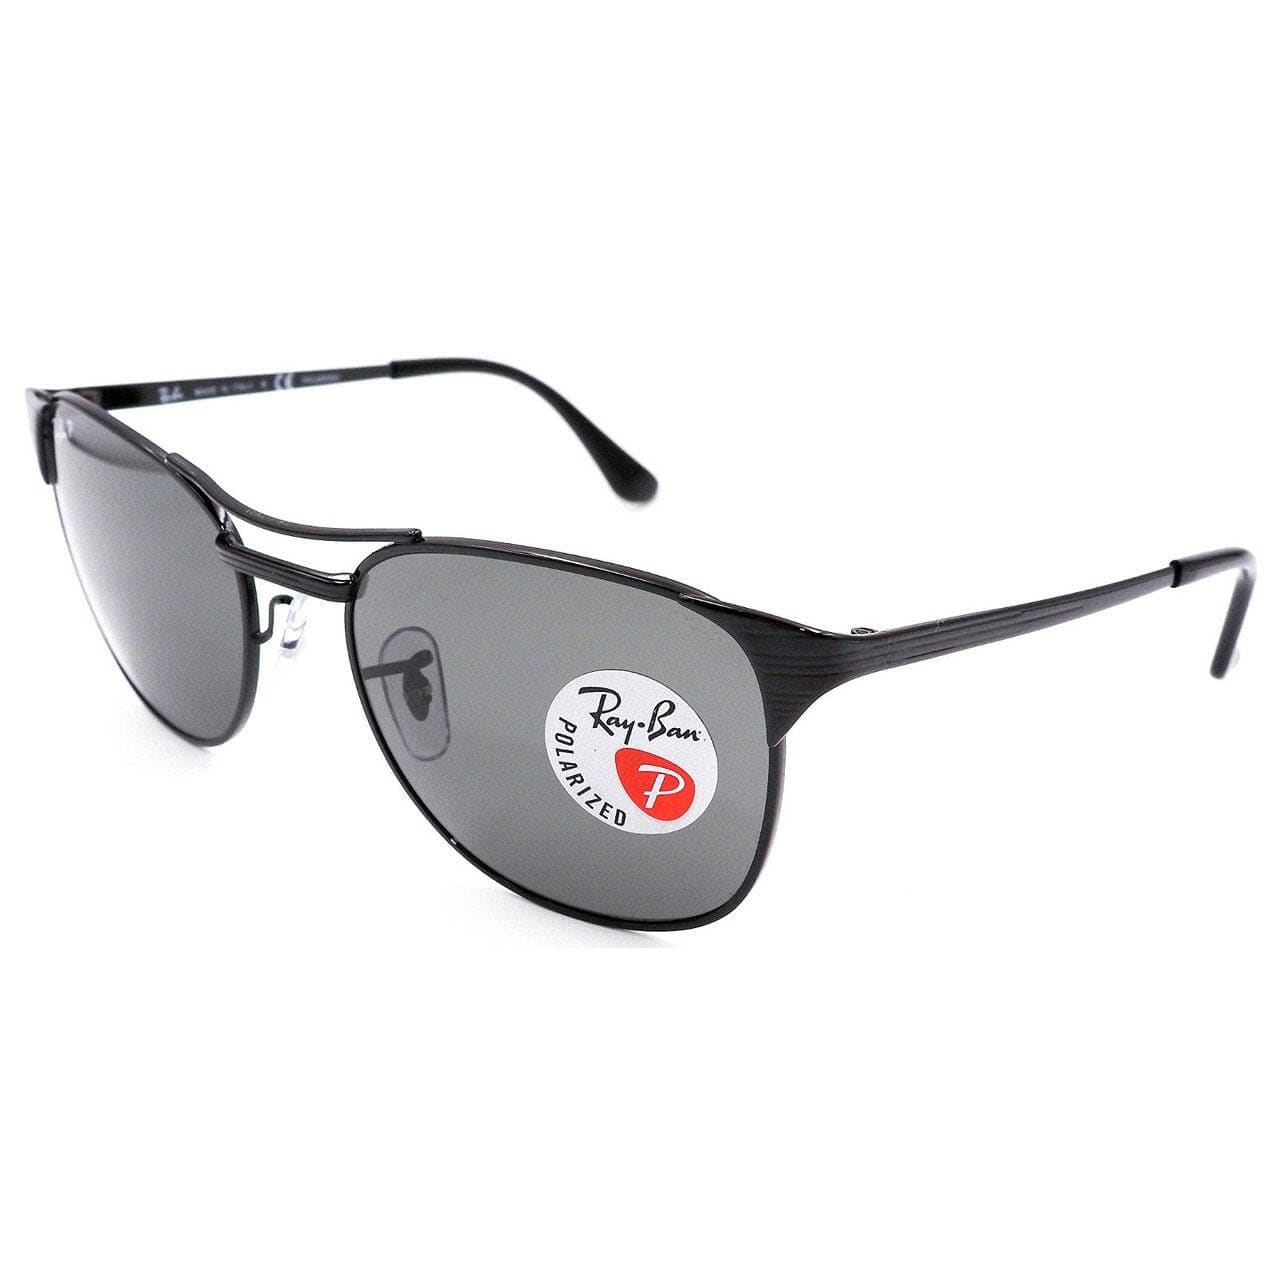 Ray-Ban RB3429-002/58 Signet Black Metal Frame and Grey Polarized Lens Sunglasses 805289431794